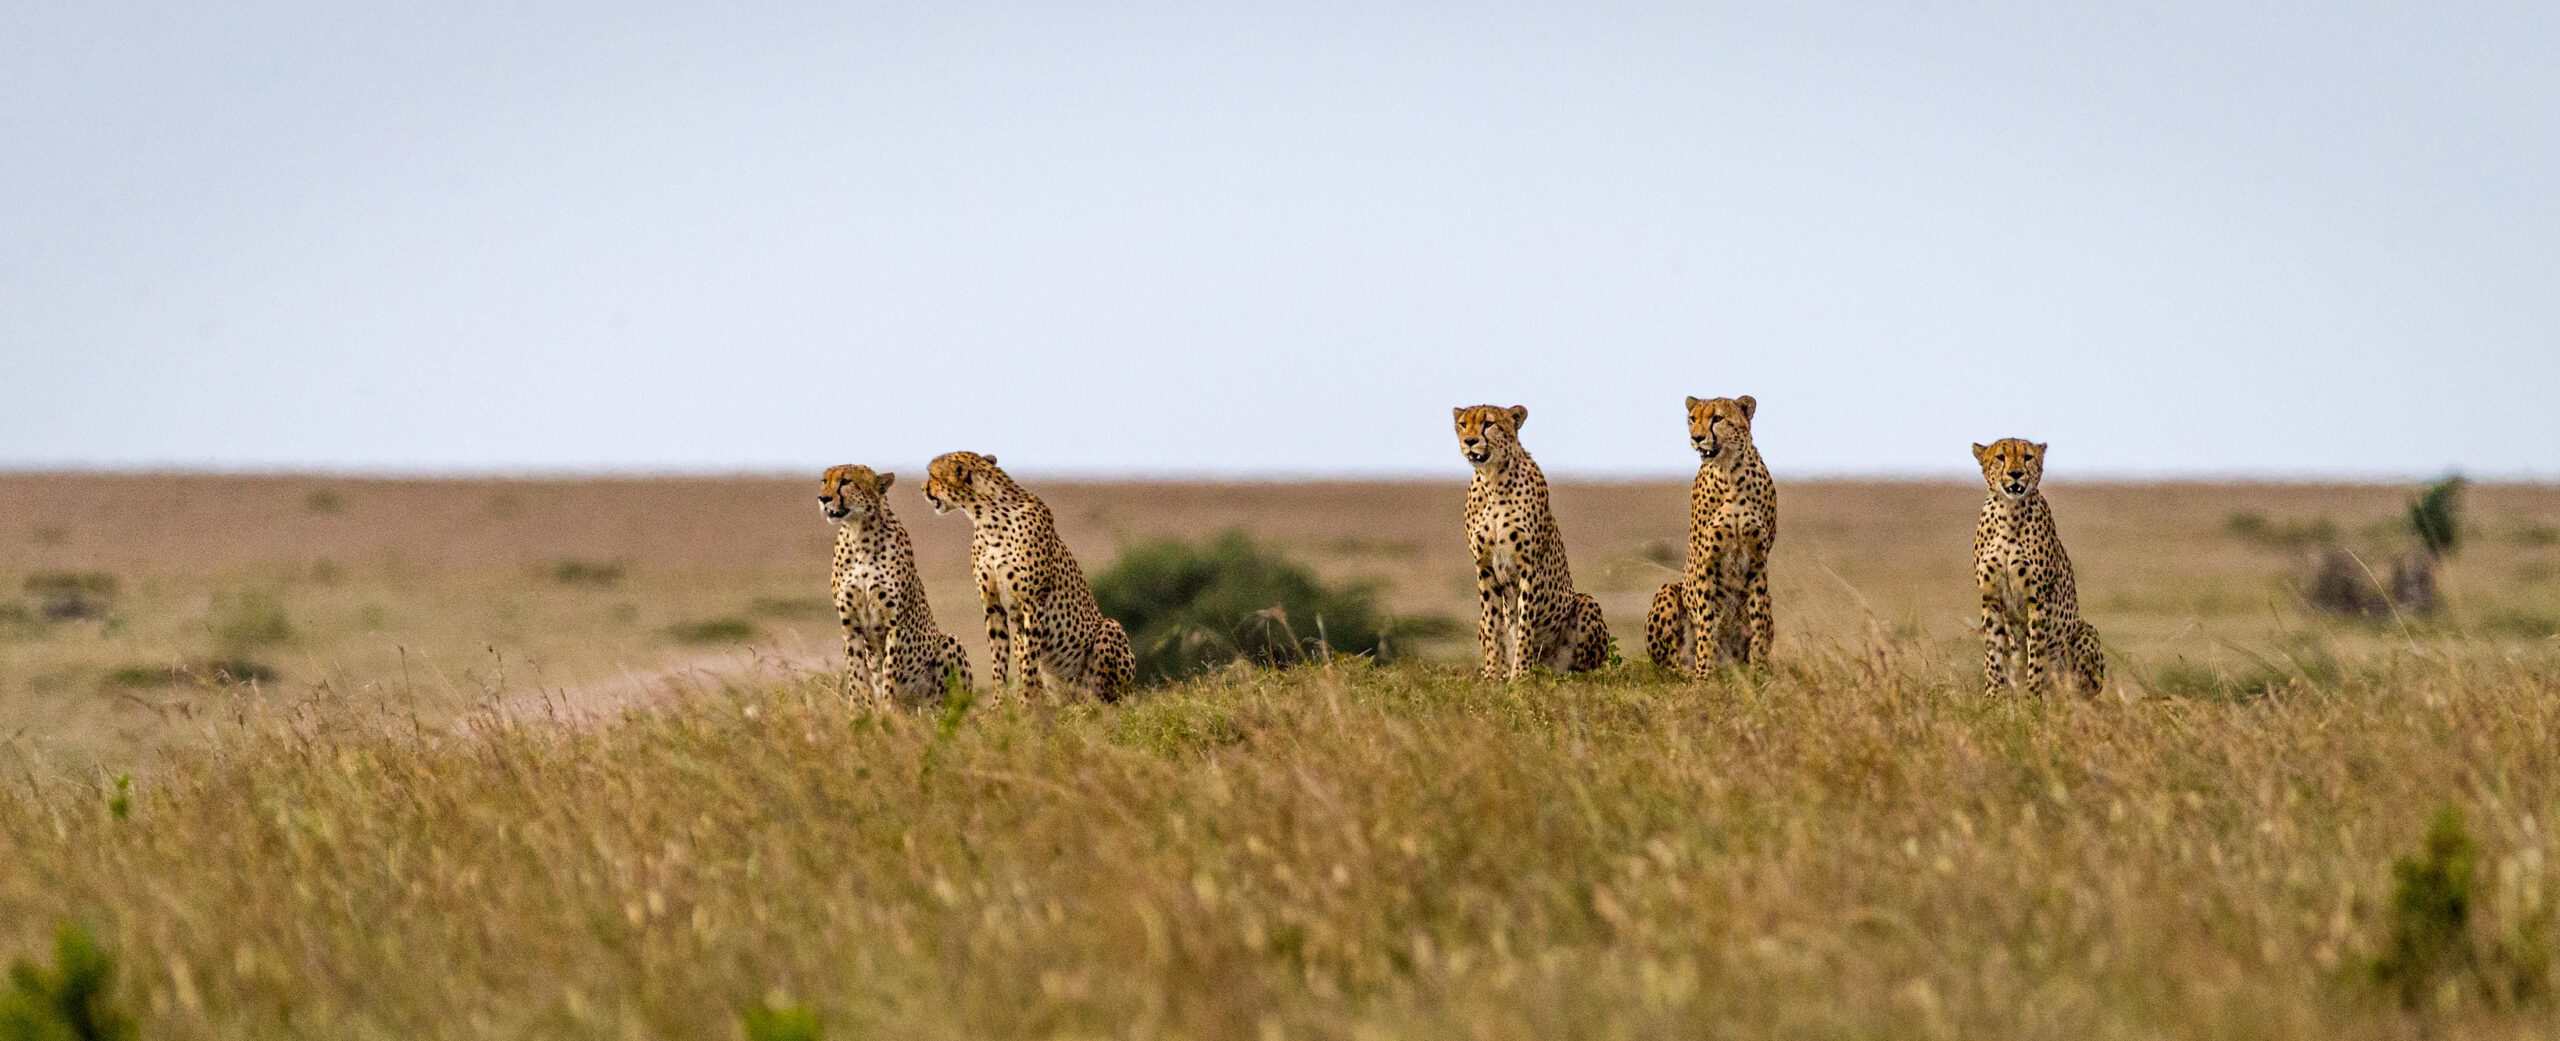 Image of the famous cheetah's the musketeers in Masai Mara